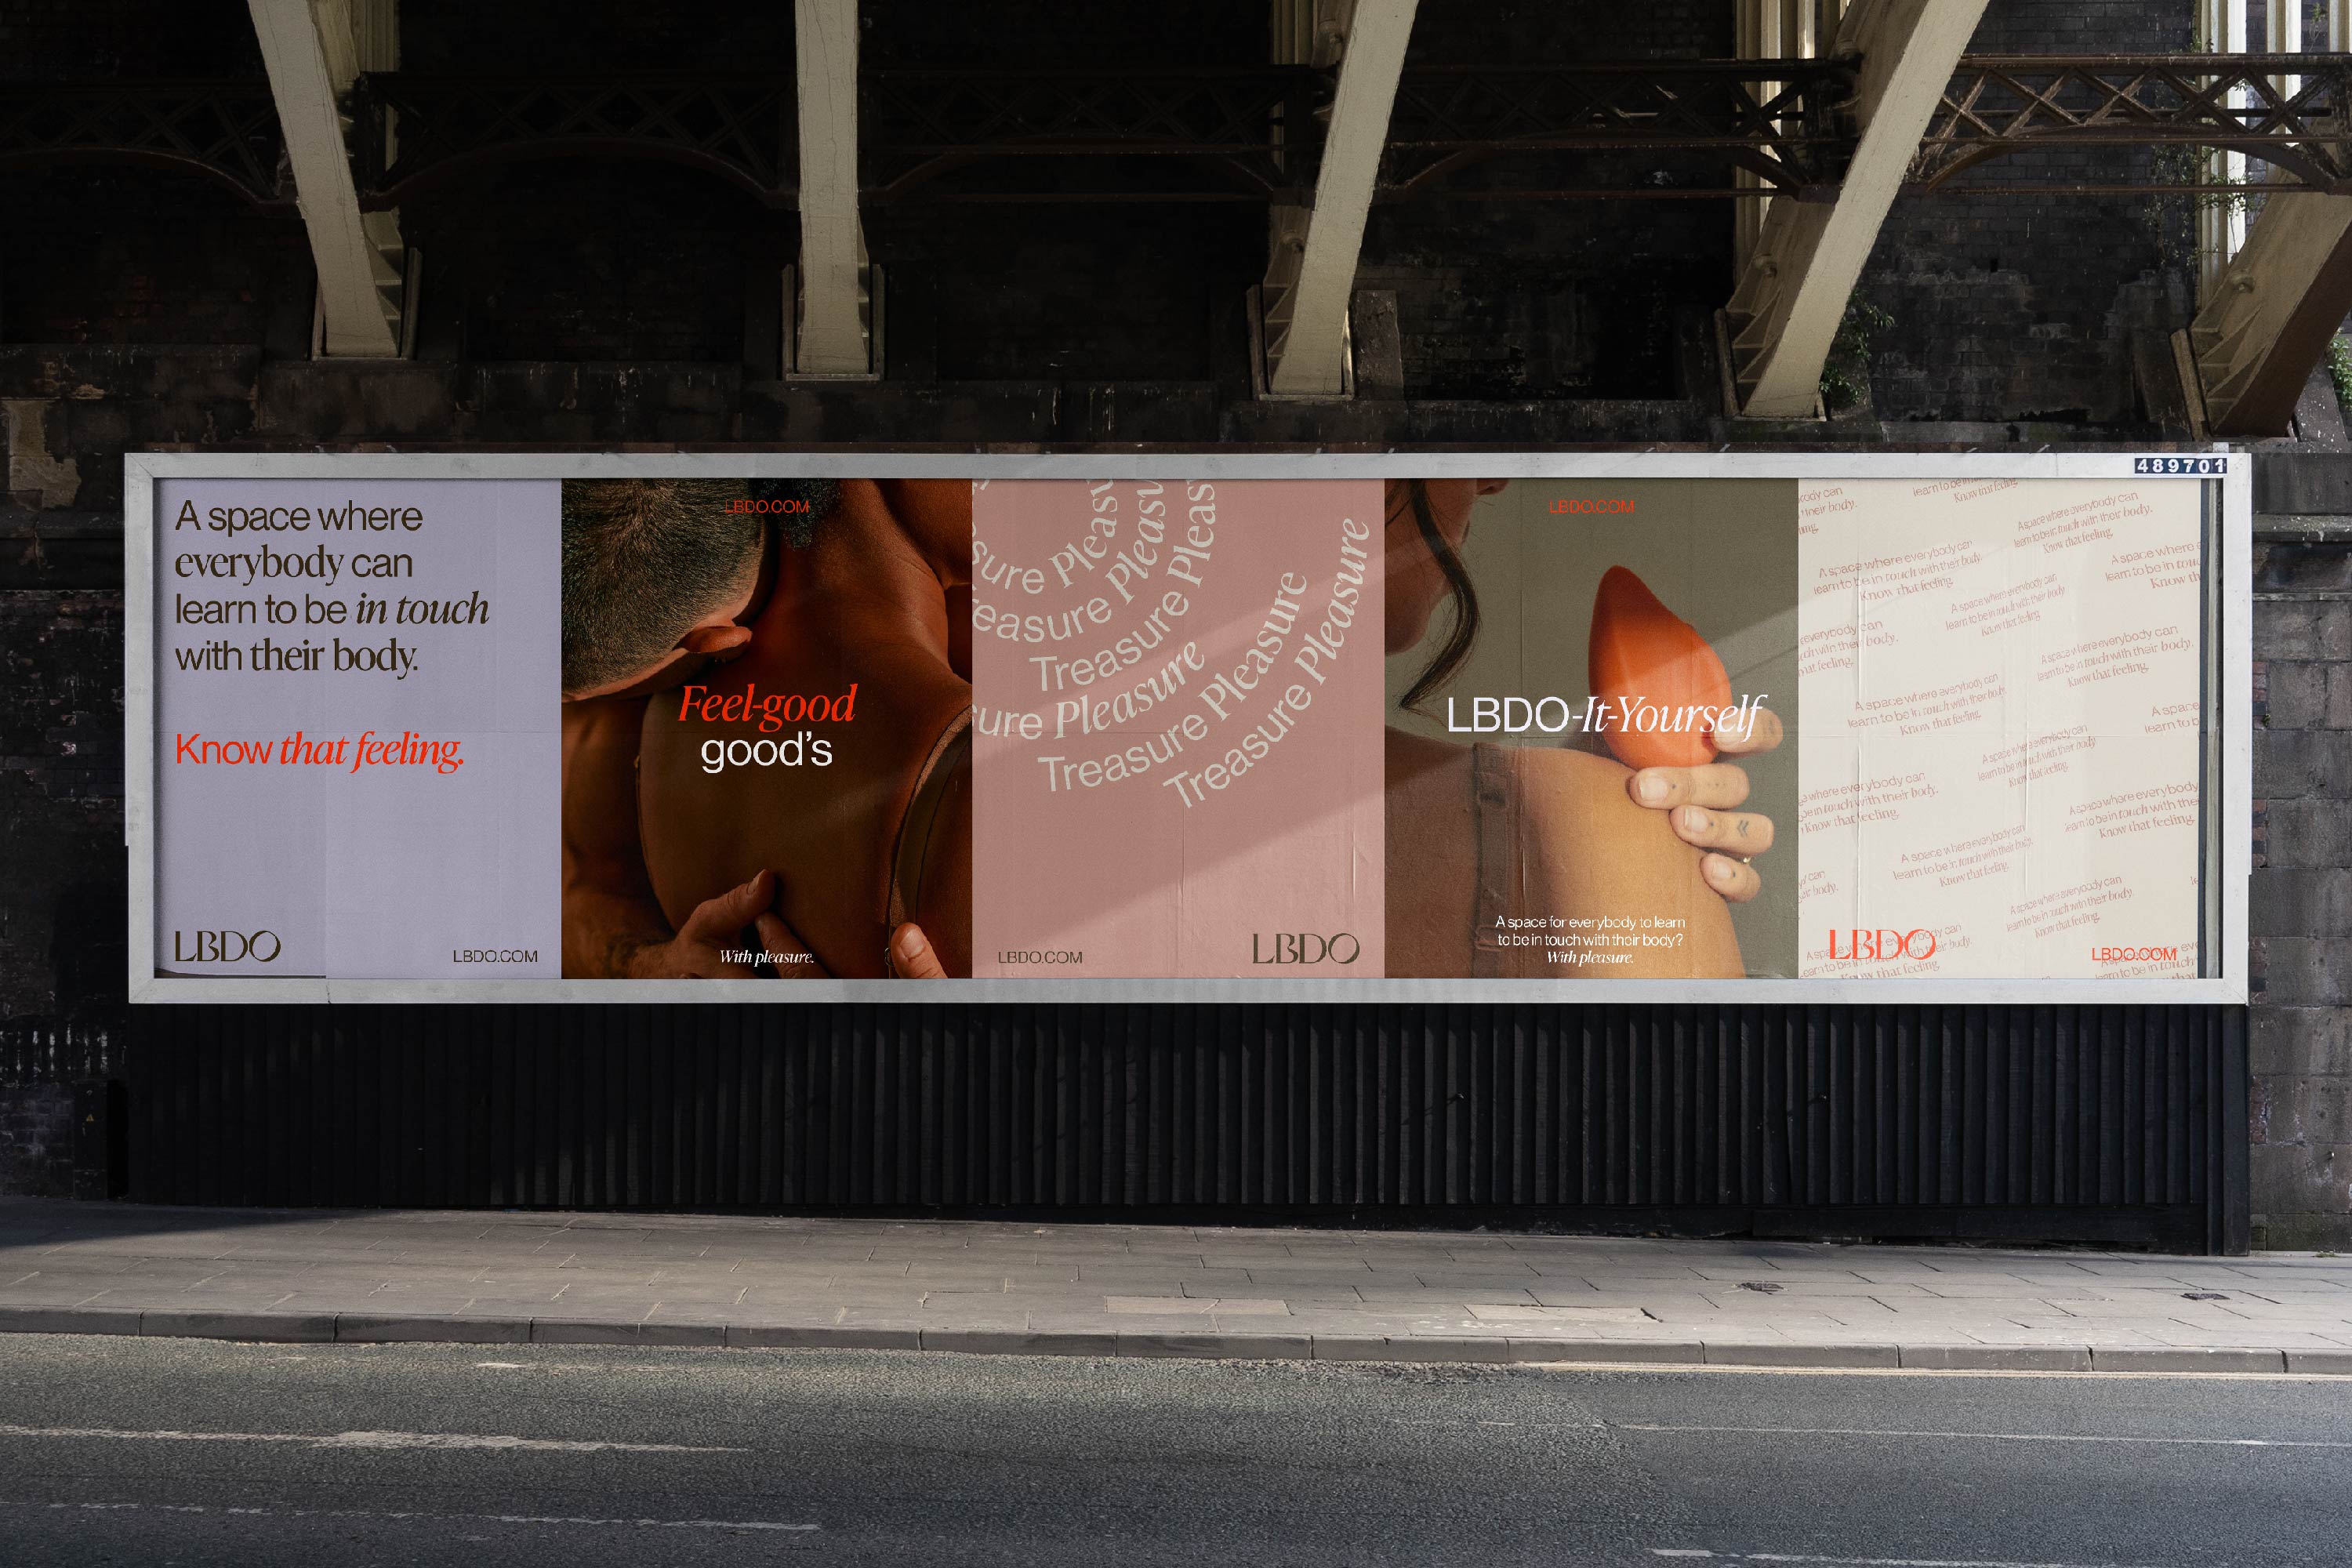 Brand identity and out of home advertising for Australian sexual wellness brand LBDO designed by Universal Favourite